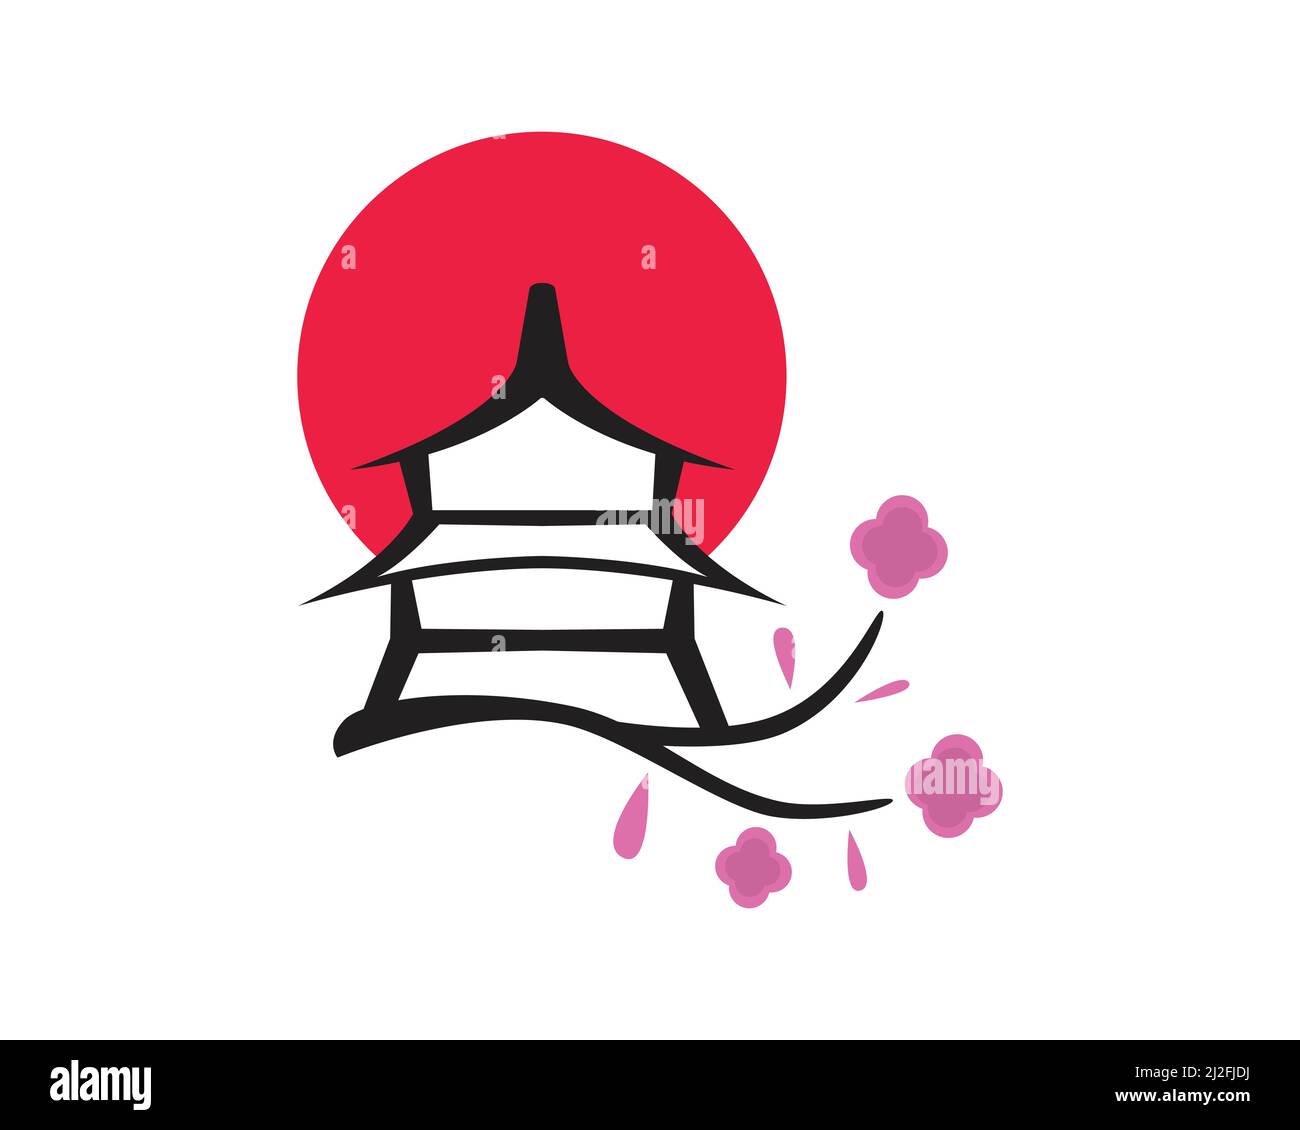 Japanese Landscape with Pagoda, Sakura Flowers and a Red Circle as a Symbolization of Japan Vector Stock Vector